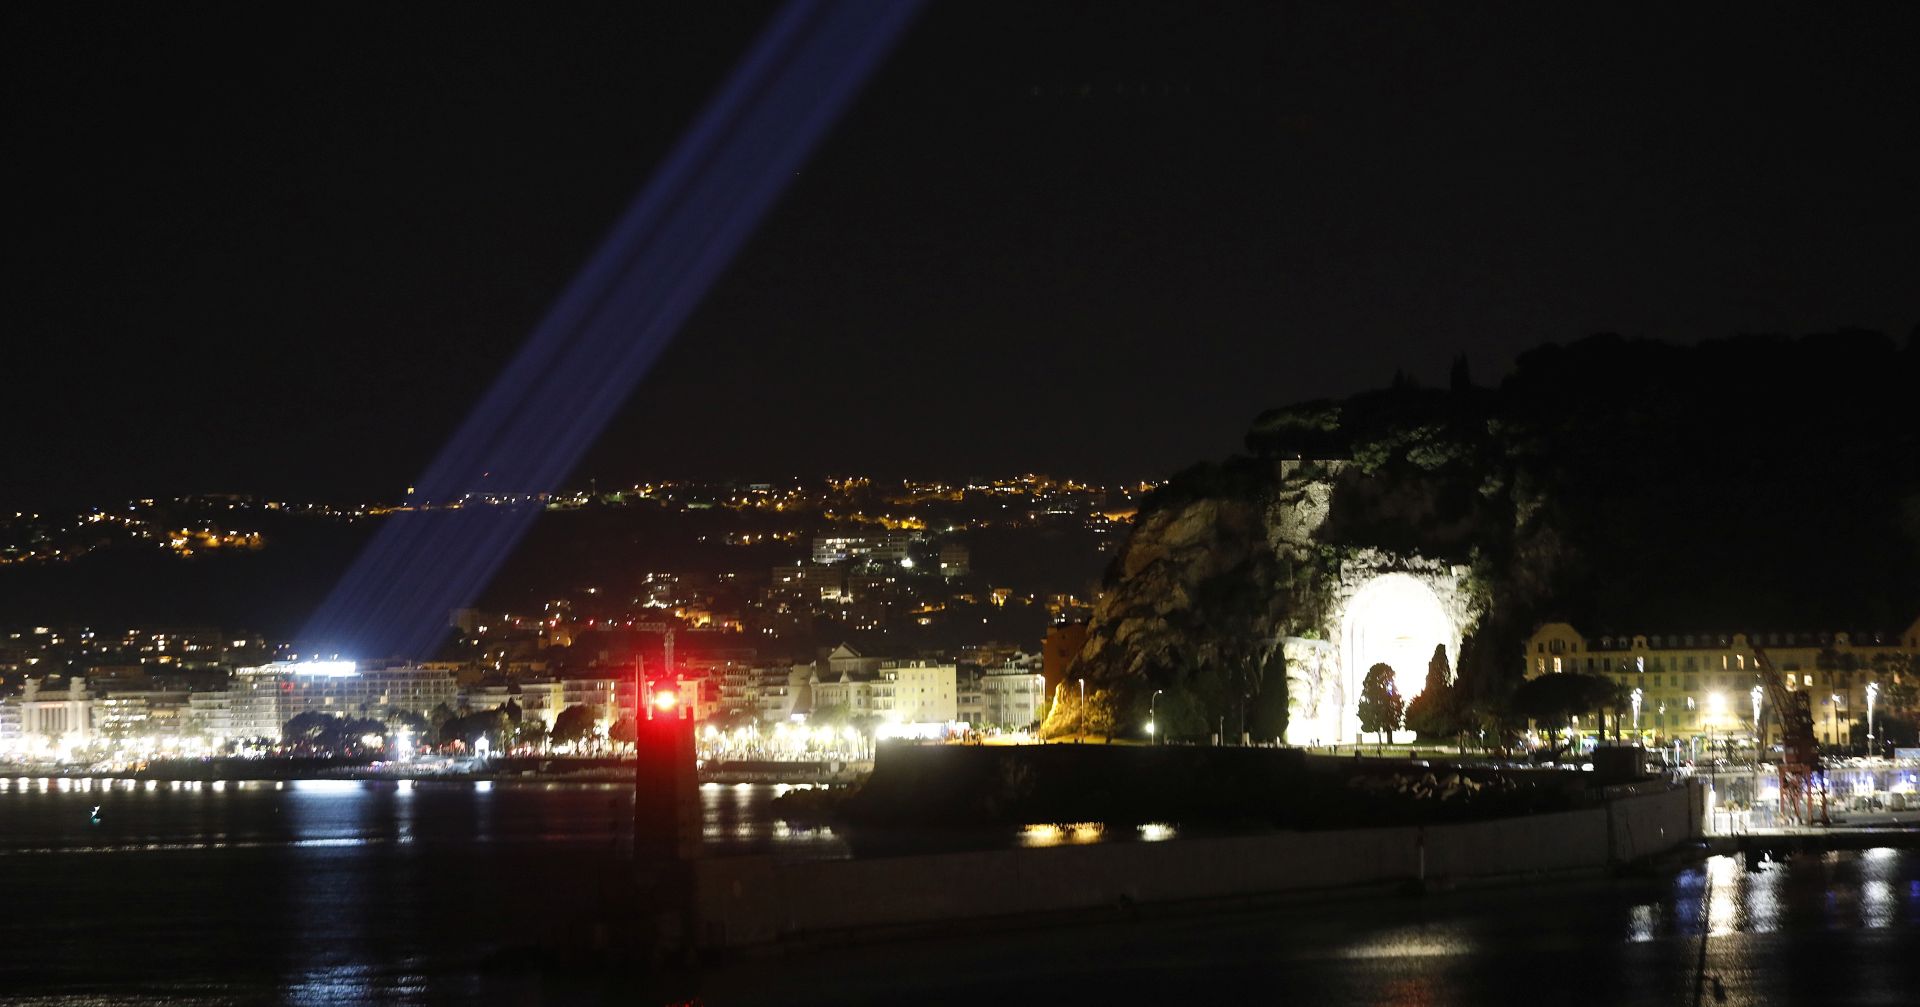 epa08546372 View of the 86 tribute lights on the Promenade des Anglais during the commemorative ceremony marking the anniversary of the 2016 terror attack in Nice, France, 14 July 2020. Eighty-six people died, and many were wounded when a truck drove into the crowd on the Promenade des Anglais during celebrations of Bastille Day in Nice on 14 July 2016.  EPA/SEBASTIEN NOGIER